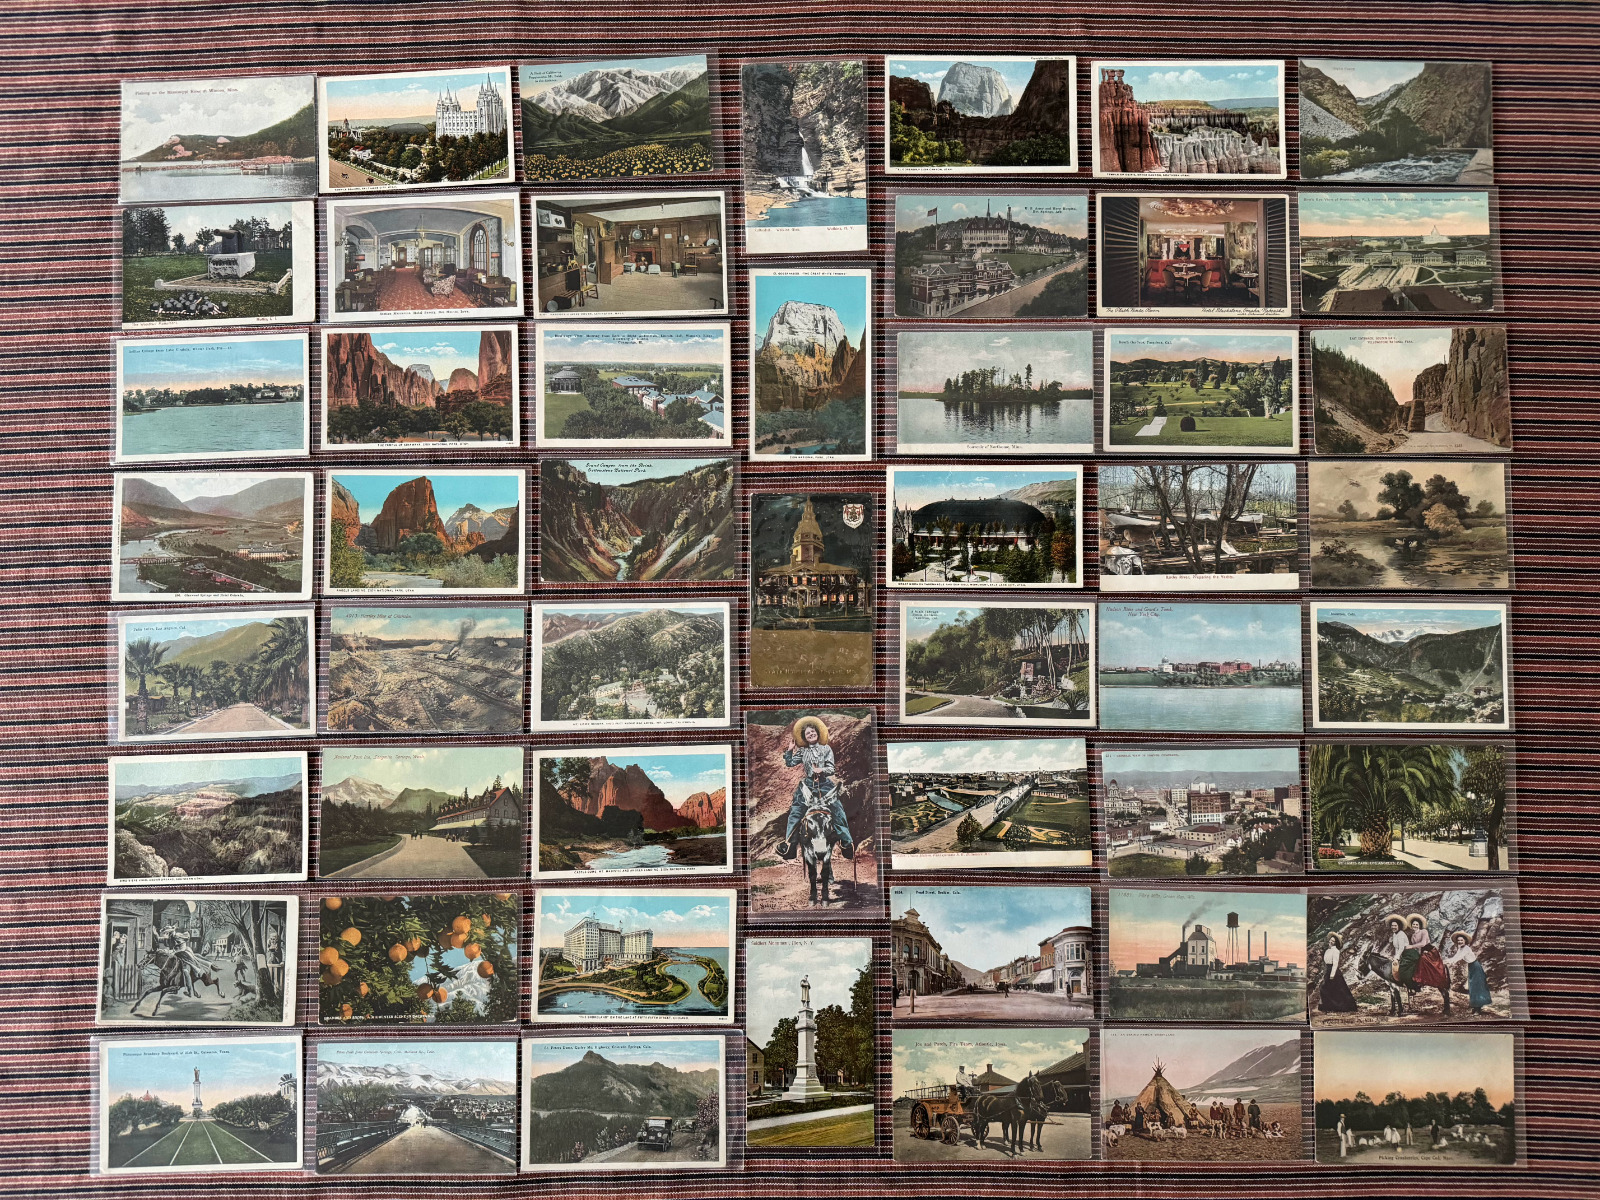 Lot of 50 Antique Unused Postcards - All from the Early 1900s - Random Selection